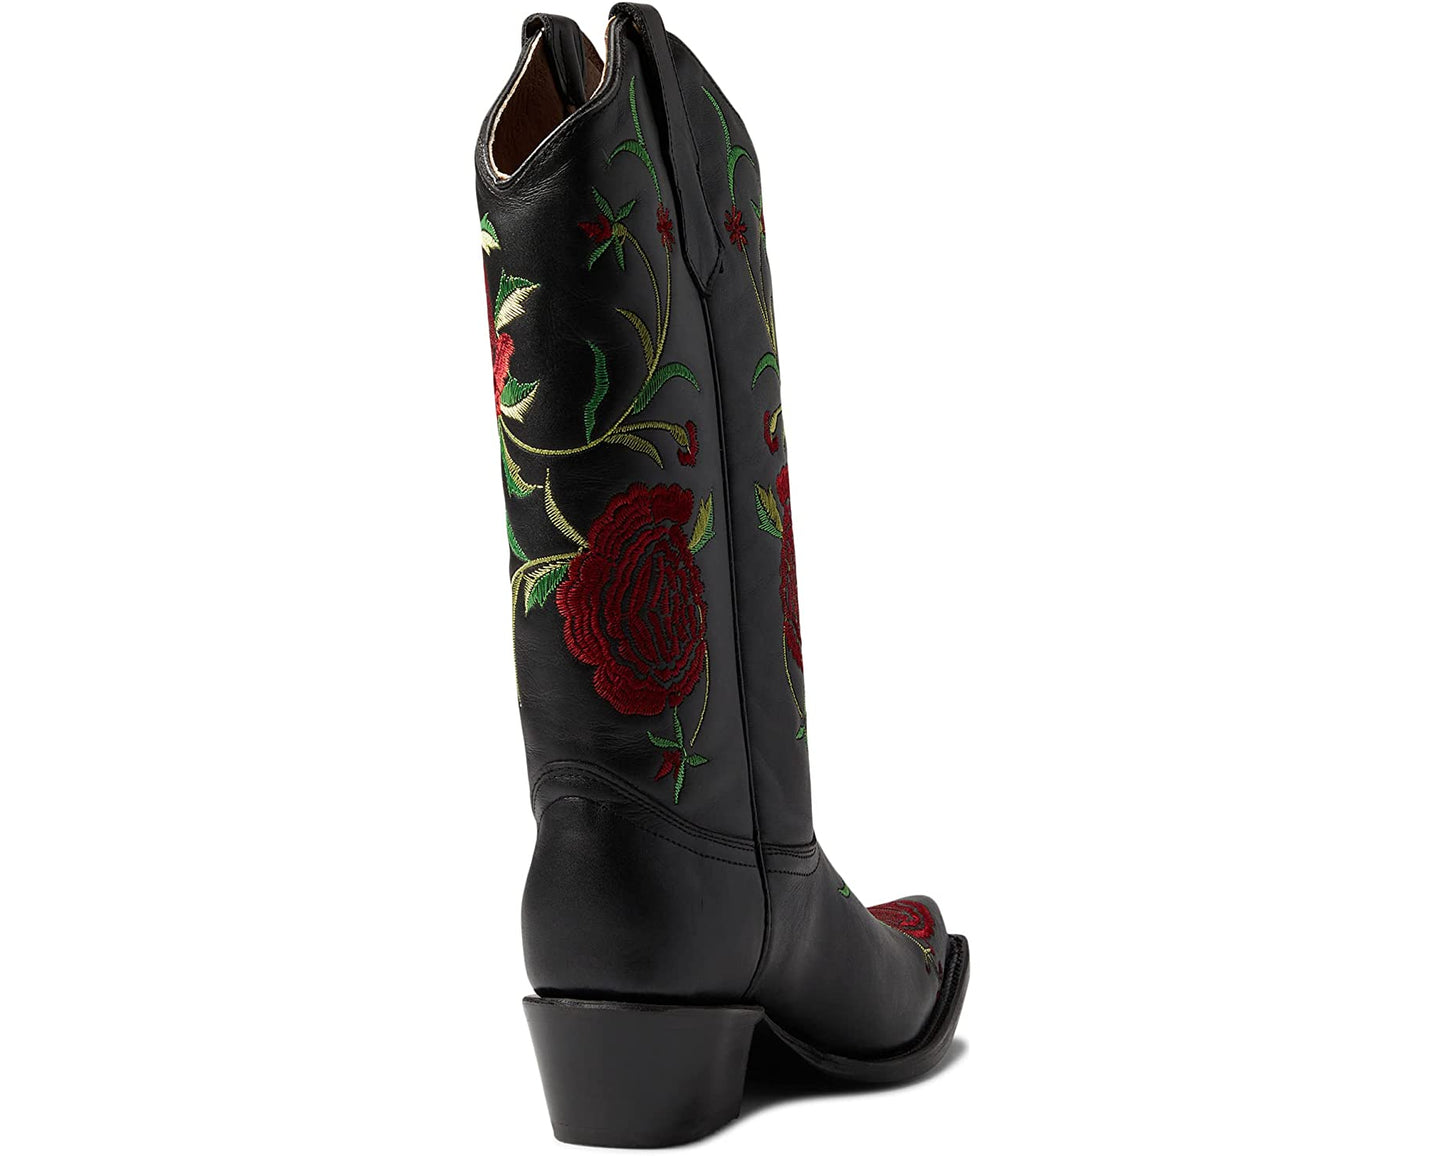 Ladies Rose Embroidered Black Snip Toe Boots